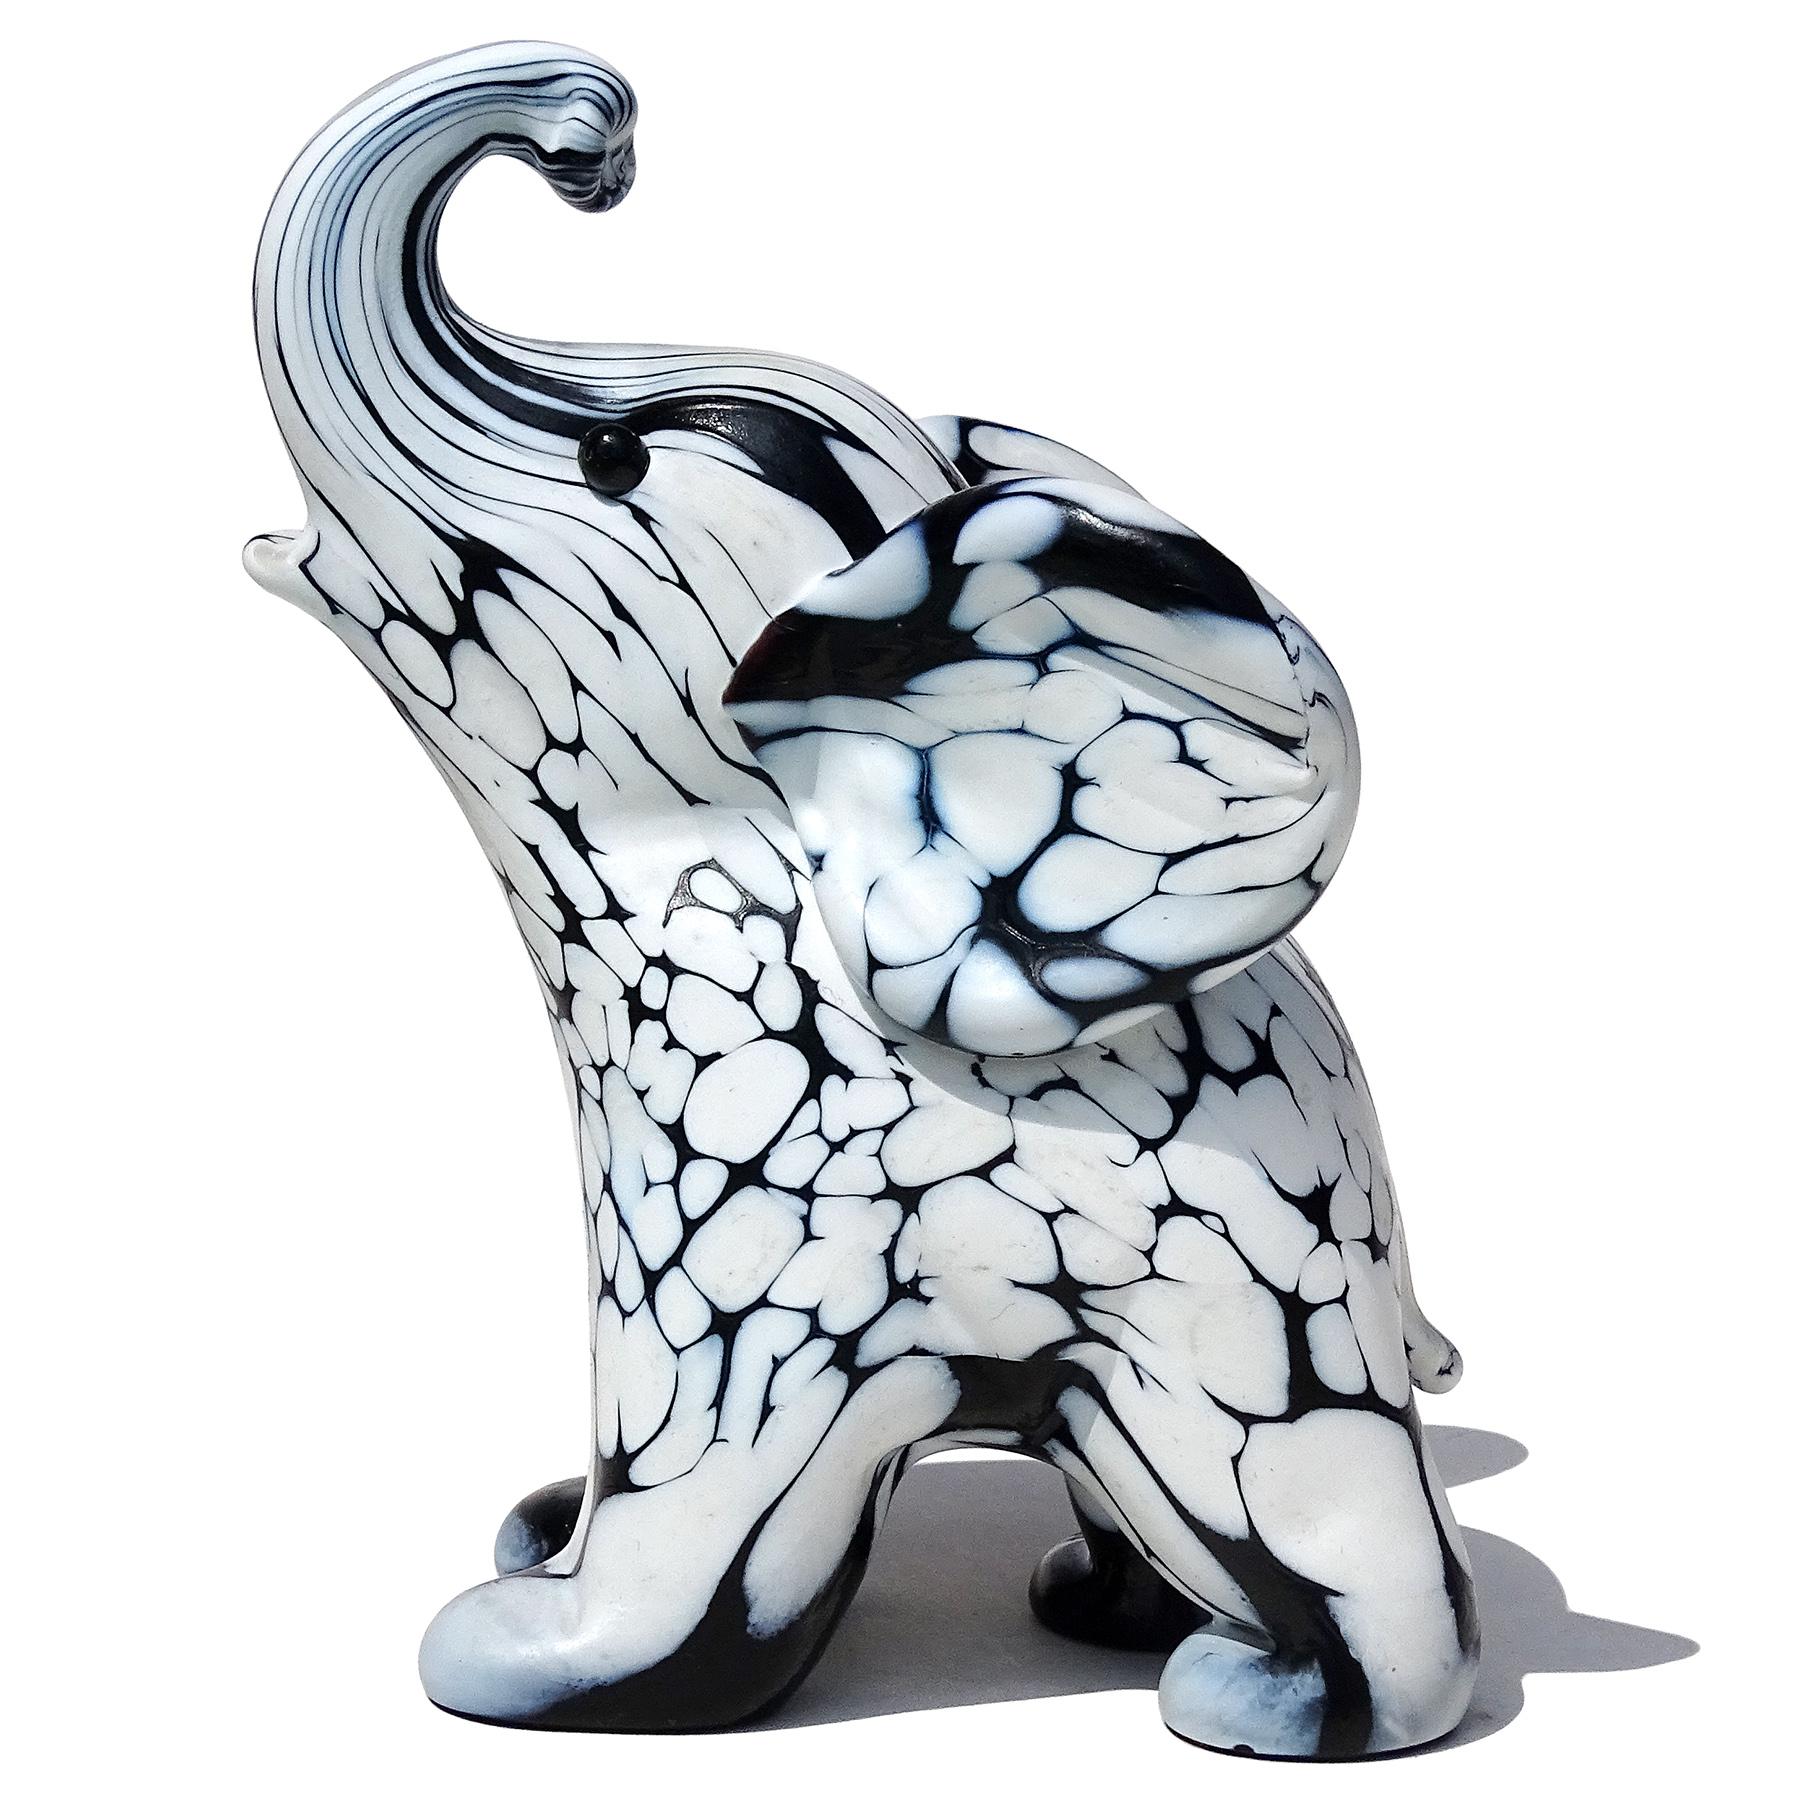 Beautiful vintage Murano hand blown black and white spotted Italian art glass baby elephant figurine sculpture. Documented to designer Archimede Seguso, from the 